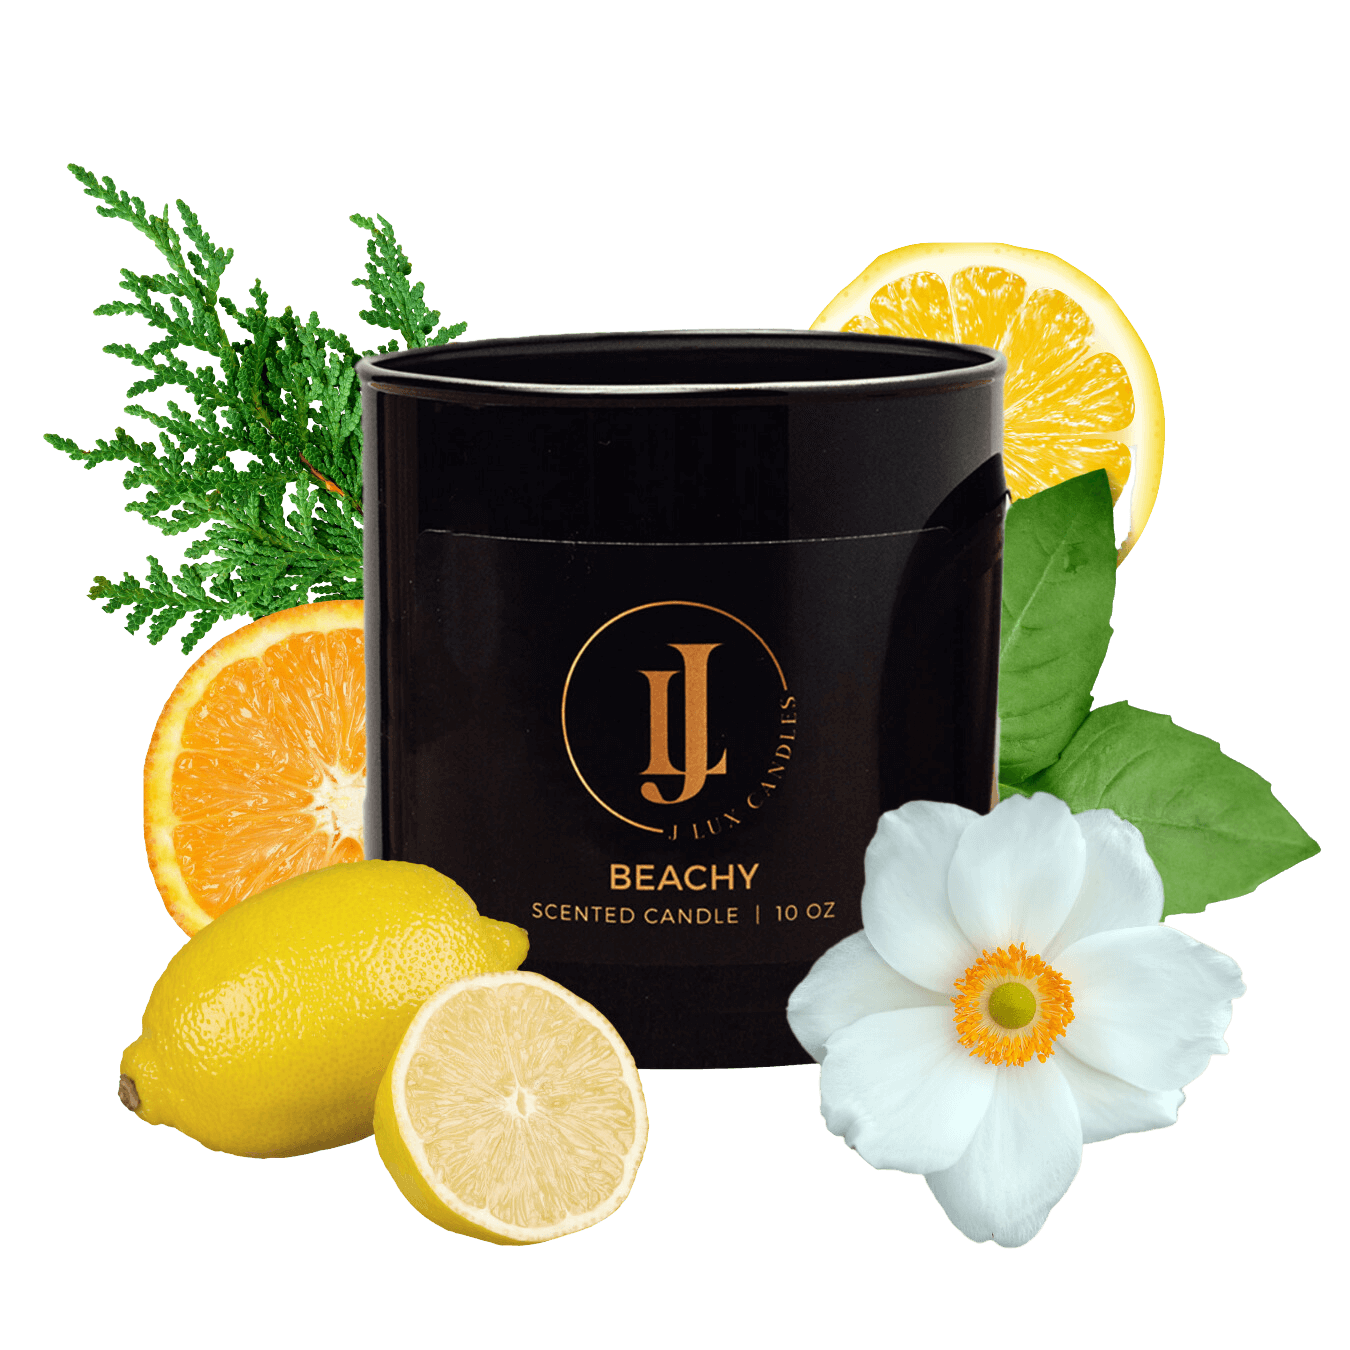 Beachy-J Lux Candles | Luxury Candles Inspired by the Virgin Islands